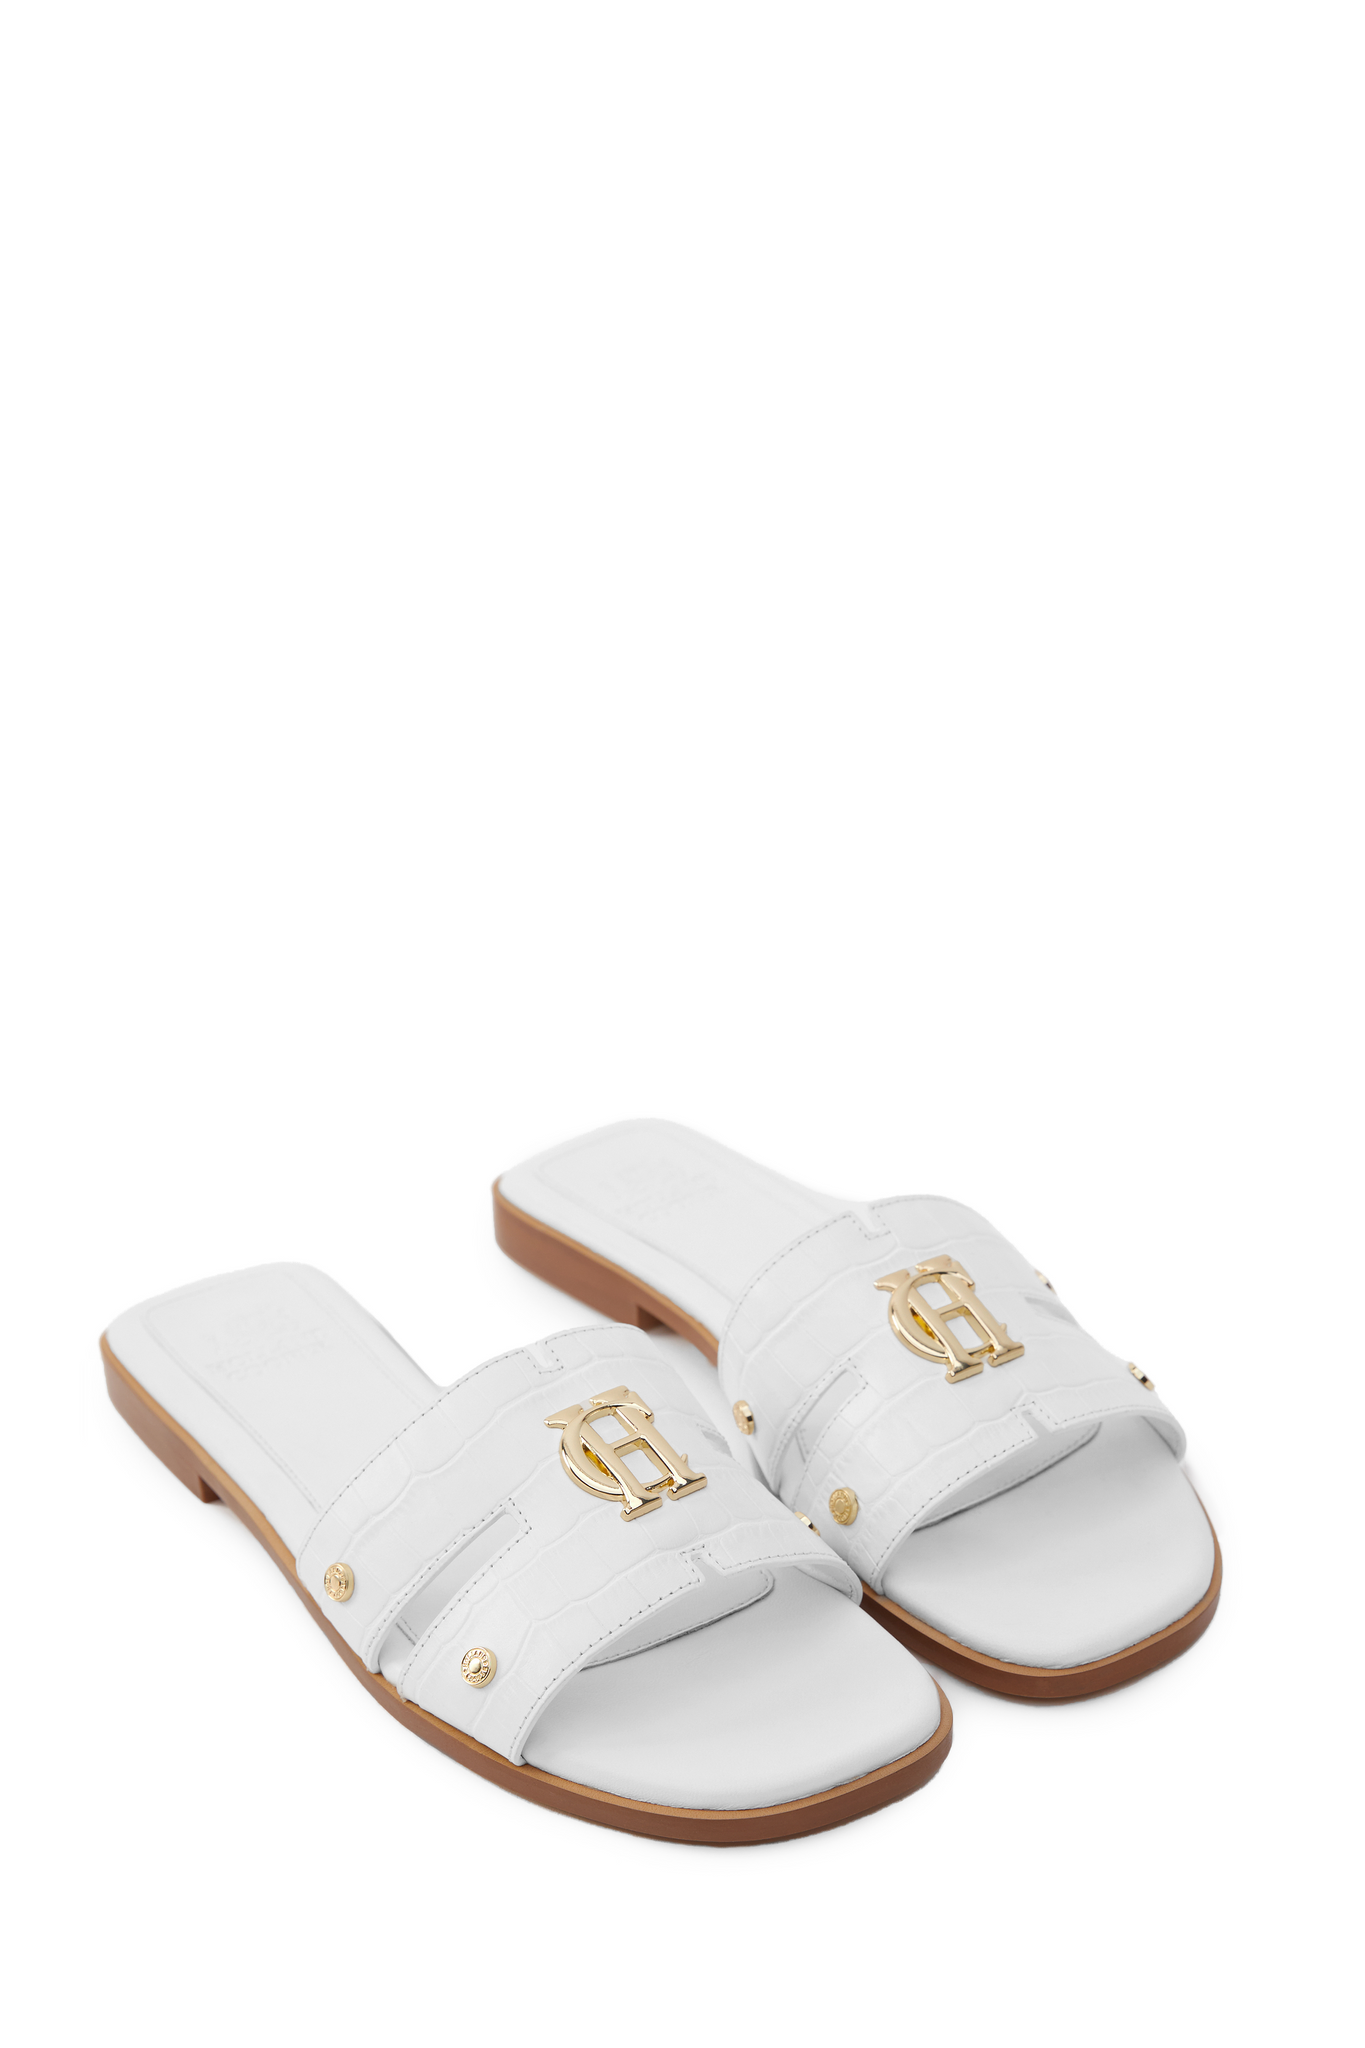 Side view of white croc embossed leather sliders with a tan leather sole and gold hardware